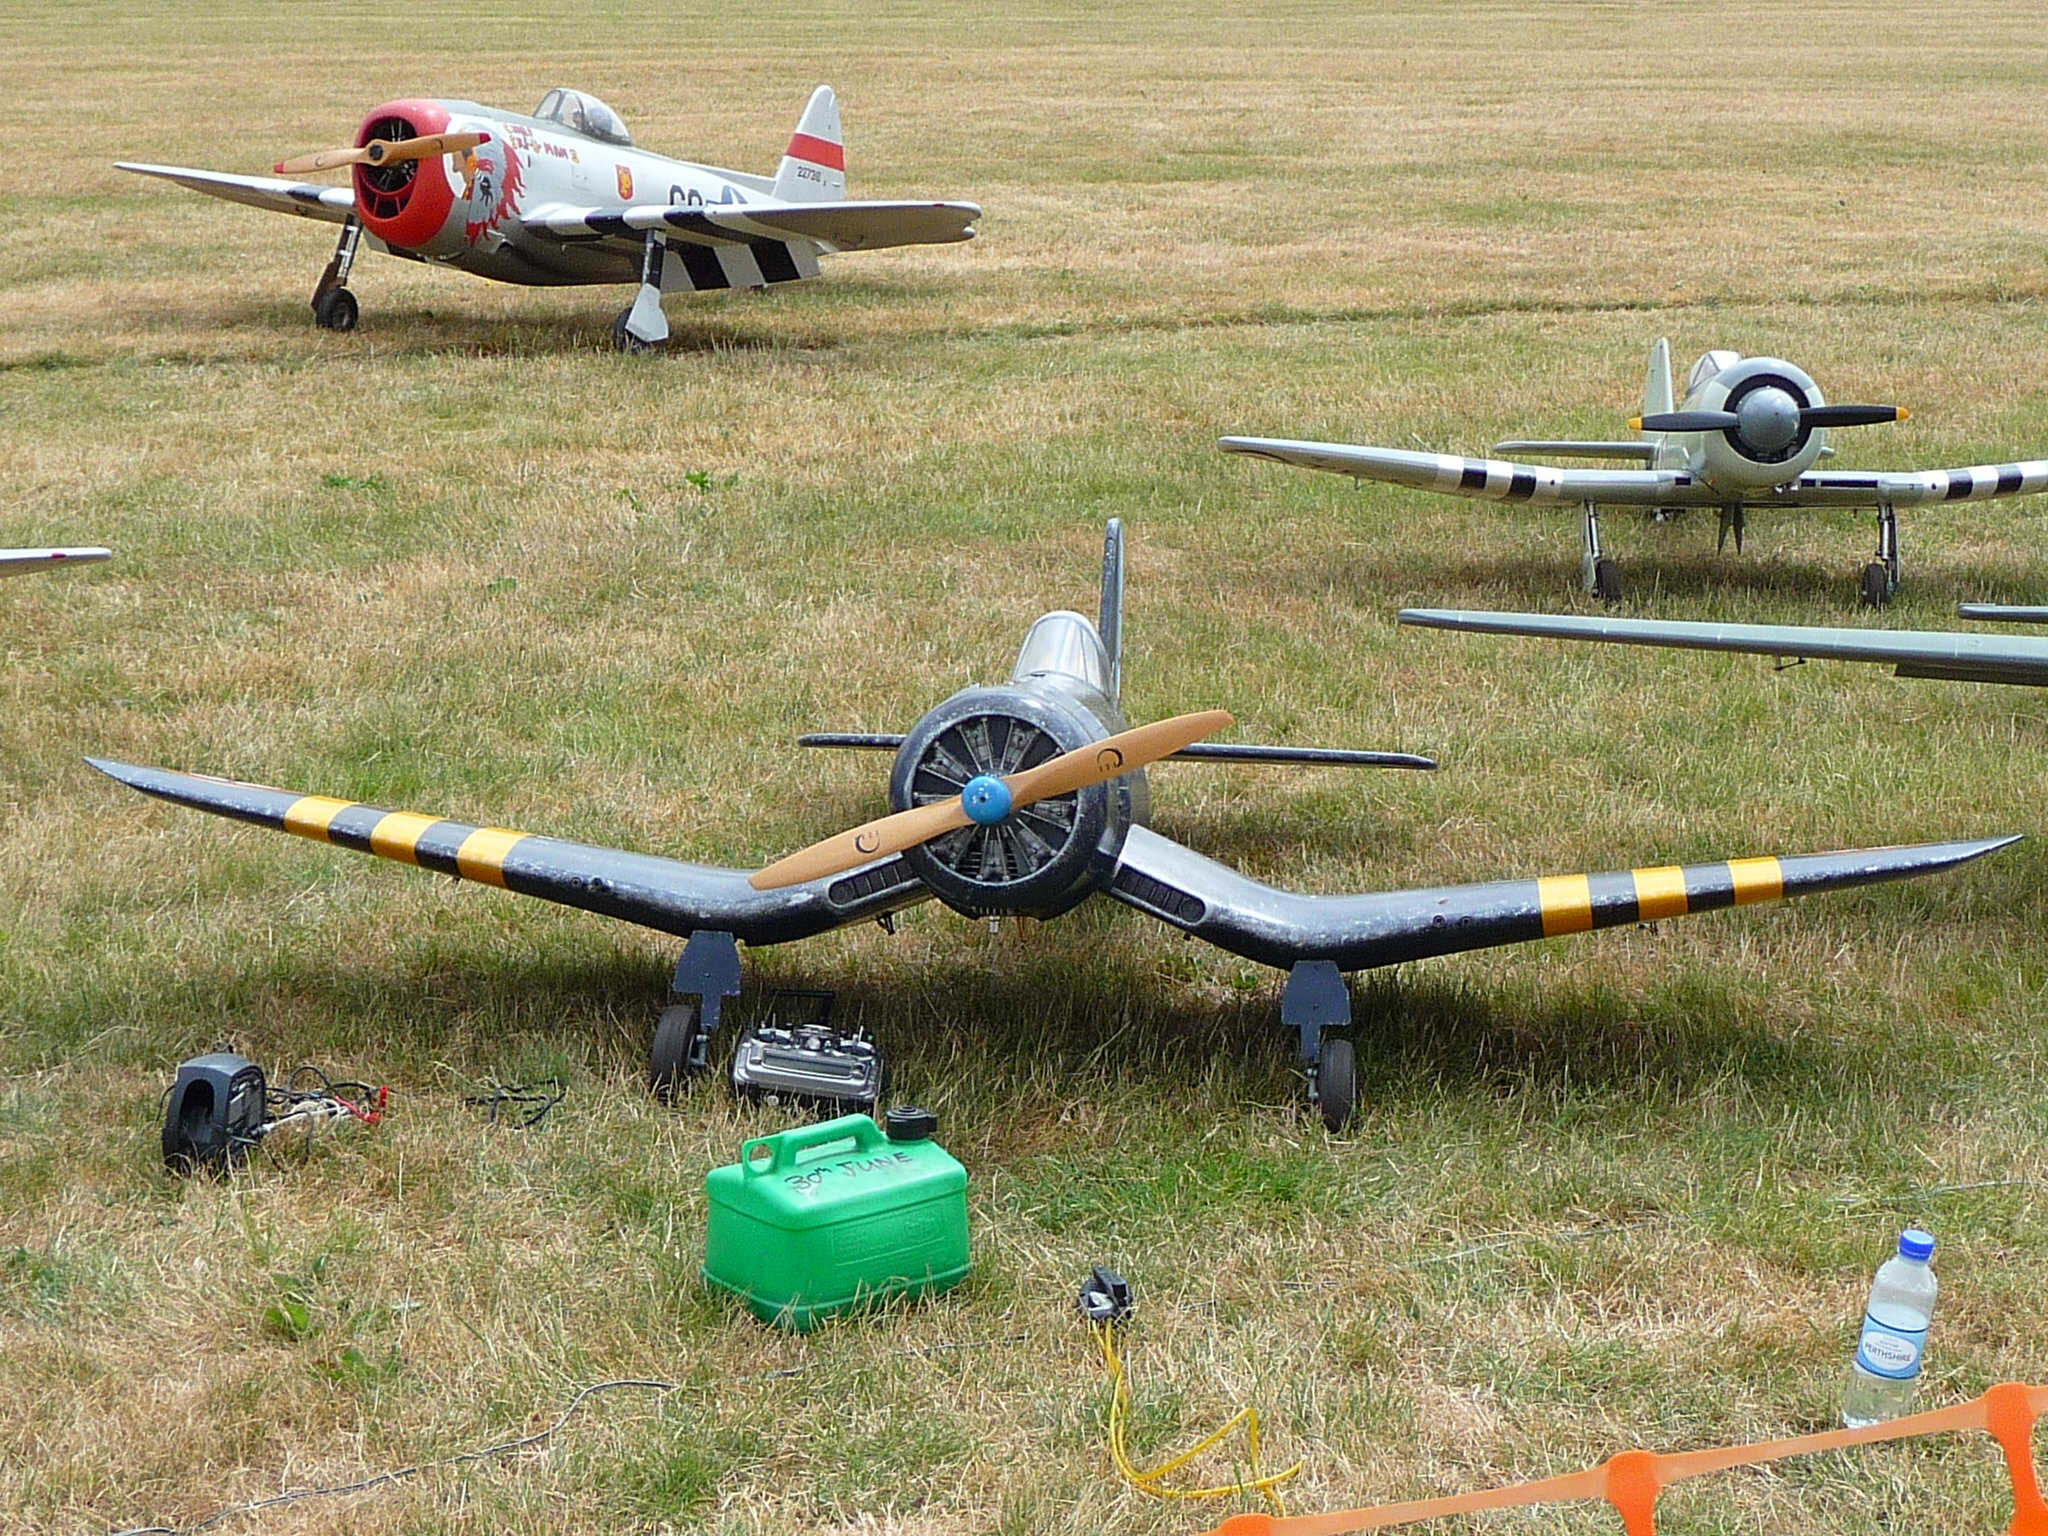 Large model aircraft at the Cosford show 2013